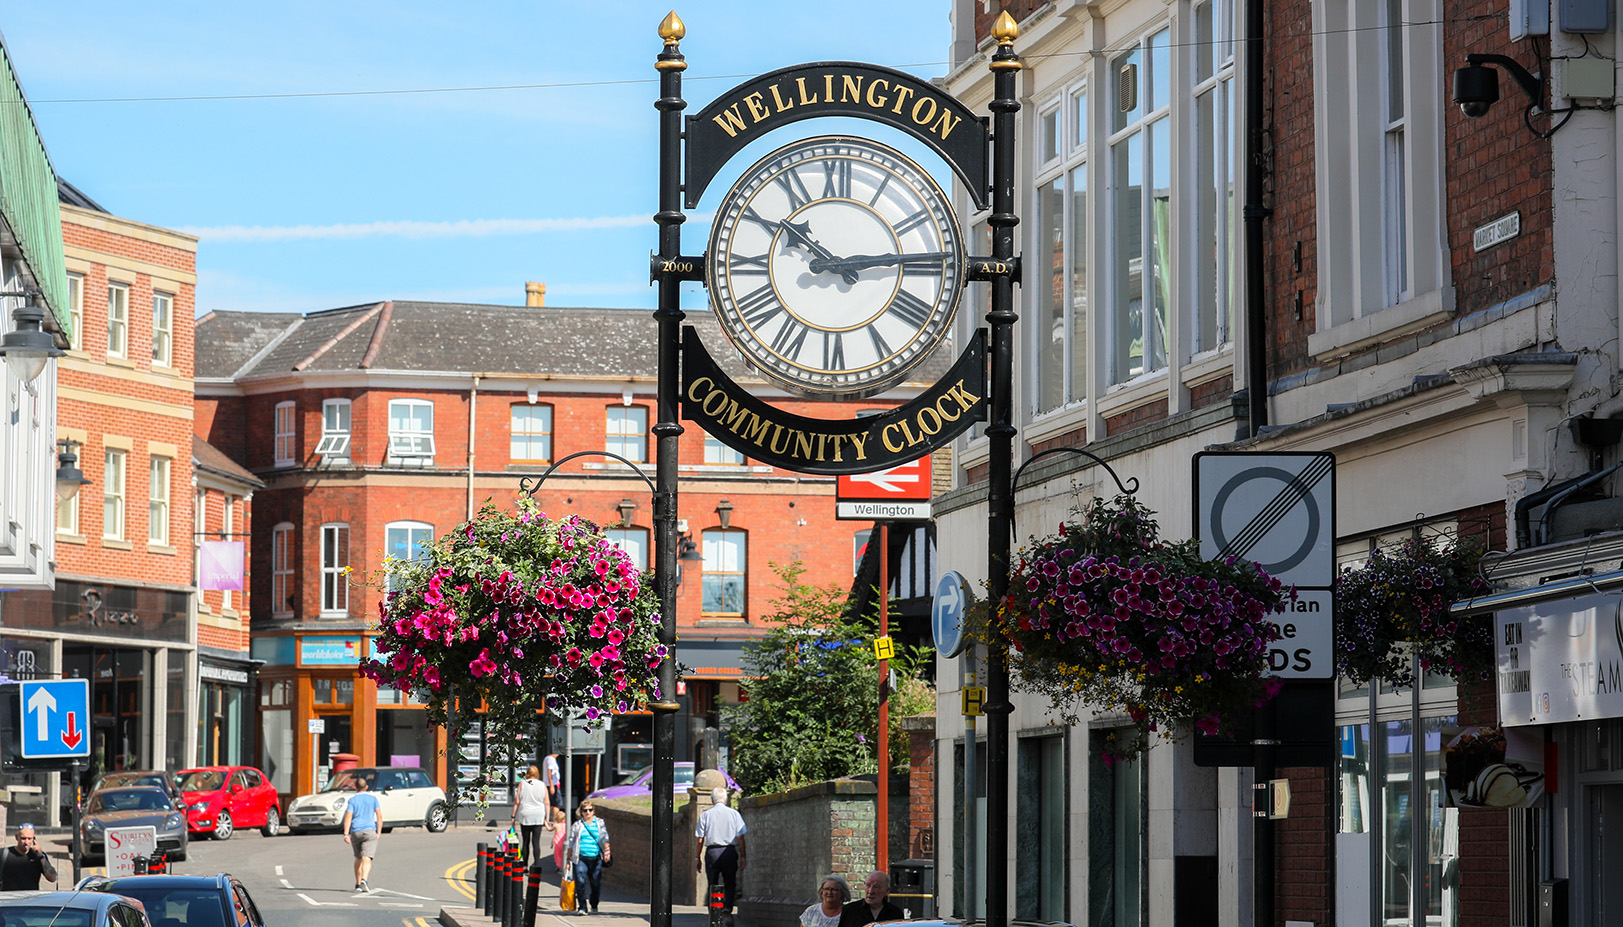 A photograph of the clock in Wellington High Street